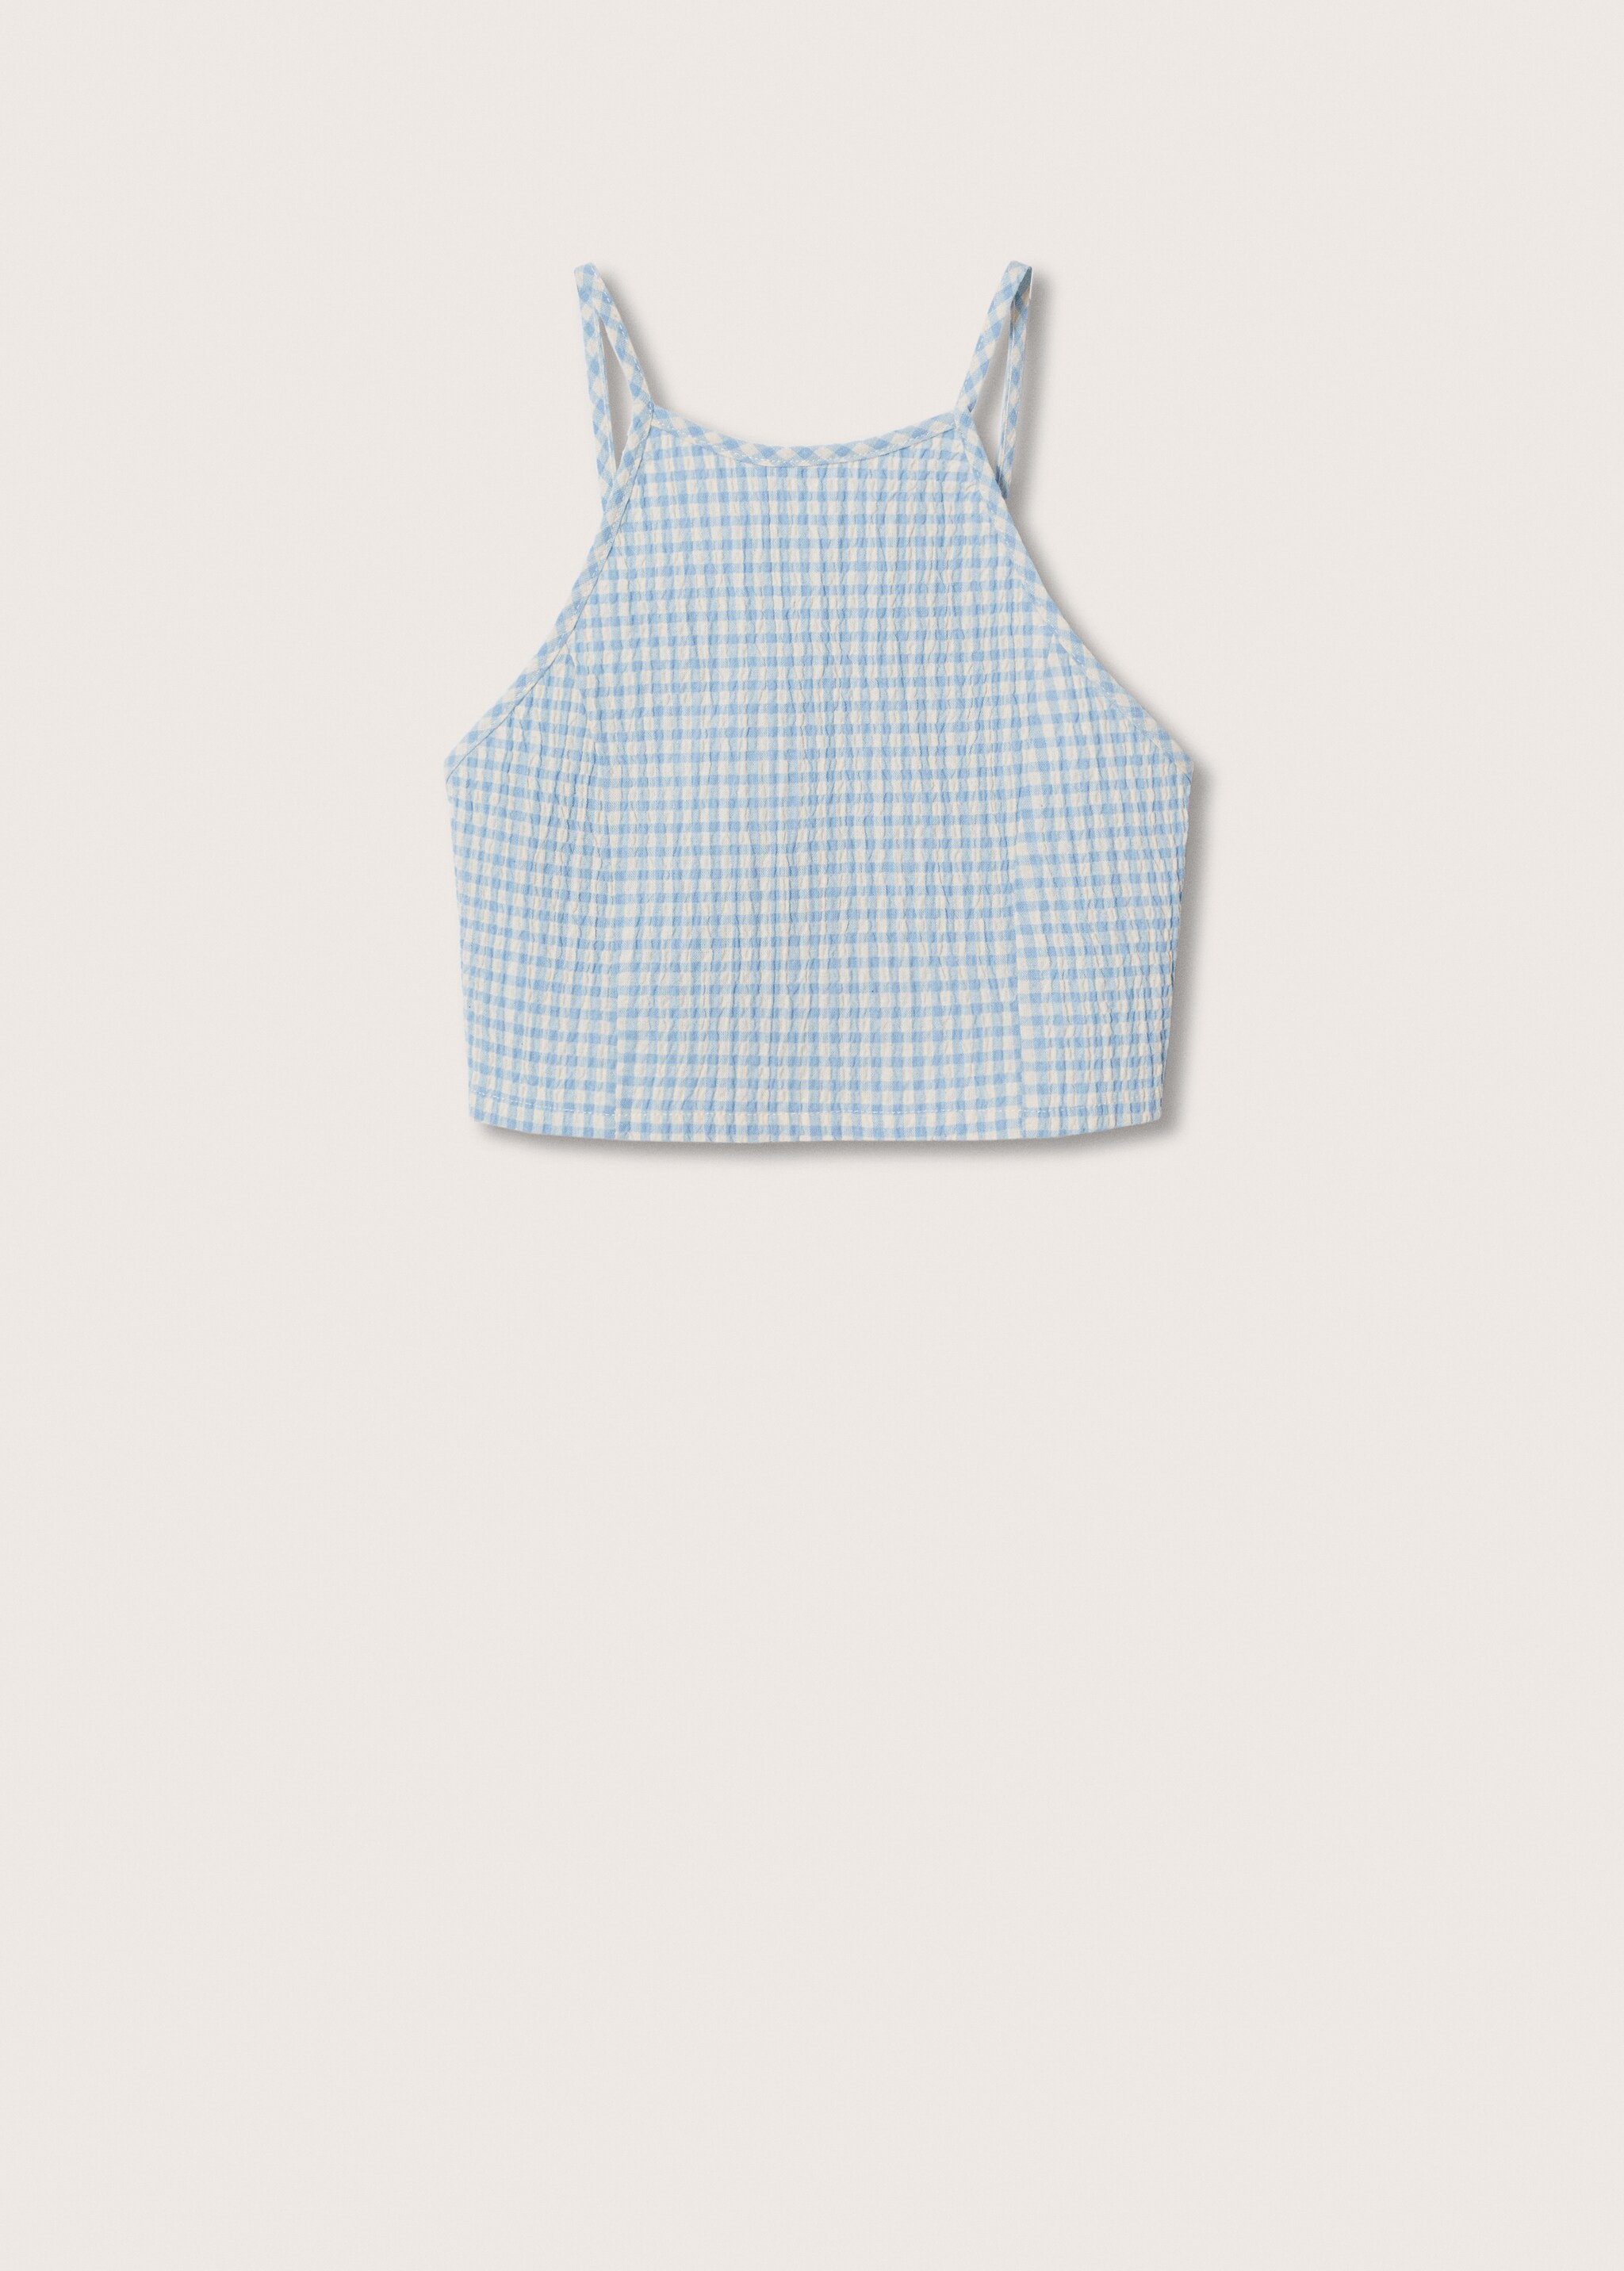 Gingham check top - Article without model